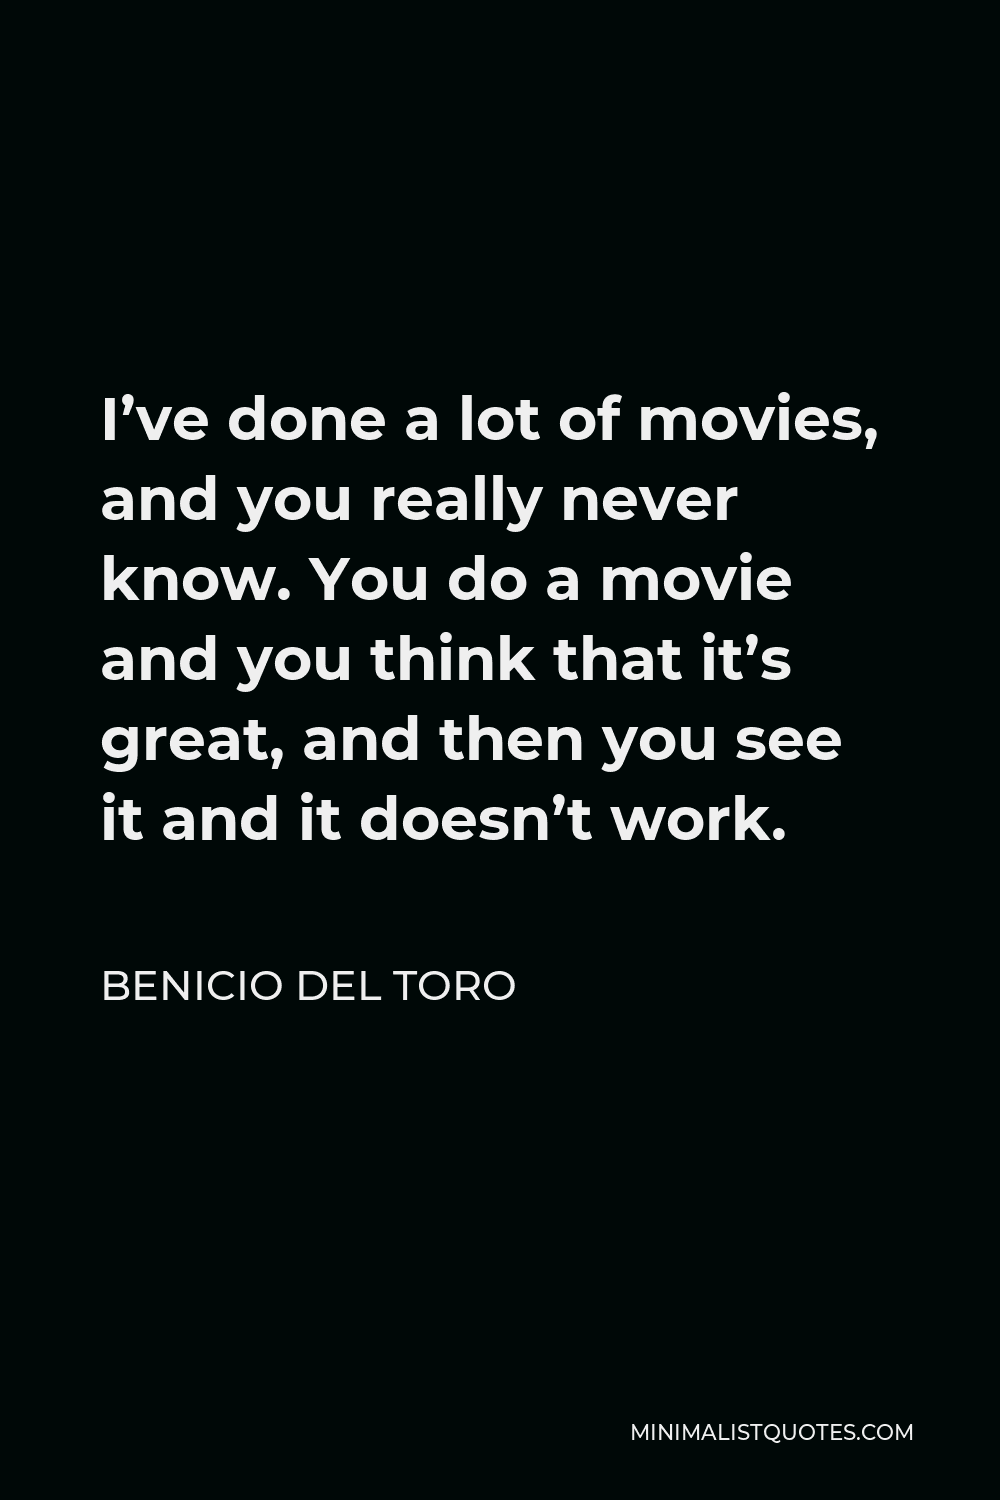 Benicio Del Toro Quote - I’ve done a lot of movies, and you really never know. You do a movie and you think that it’s great, and then you see it and it doesn’t work.